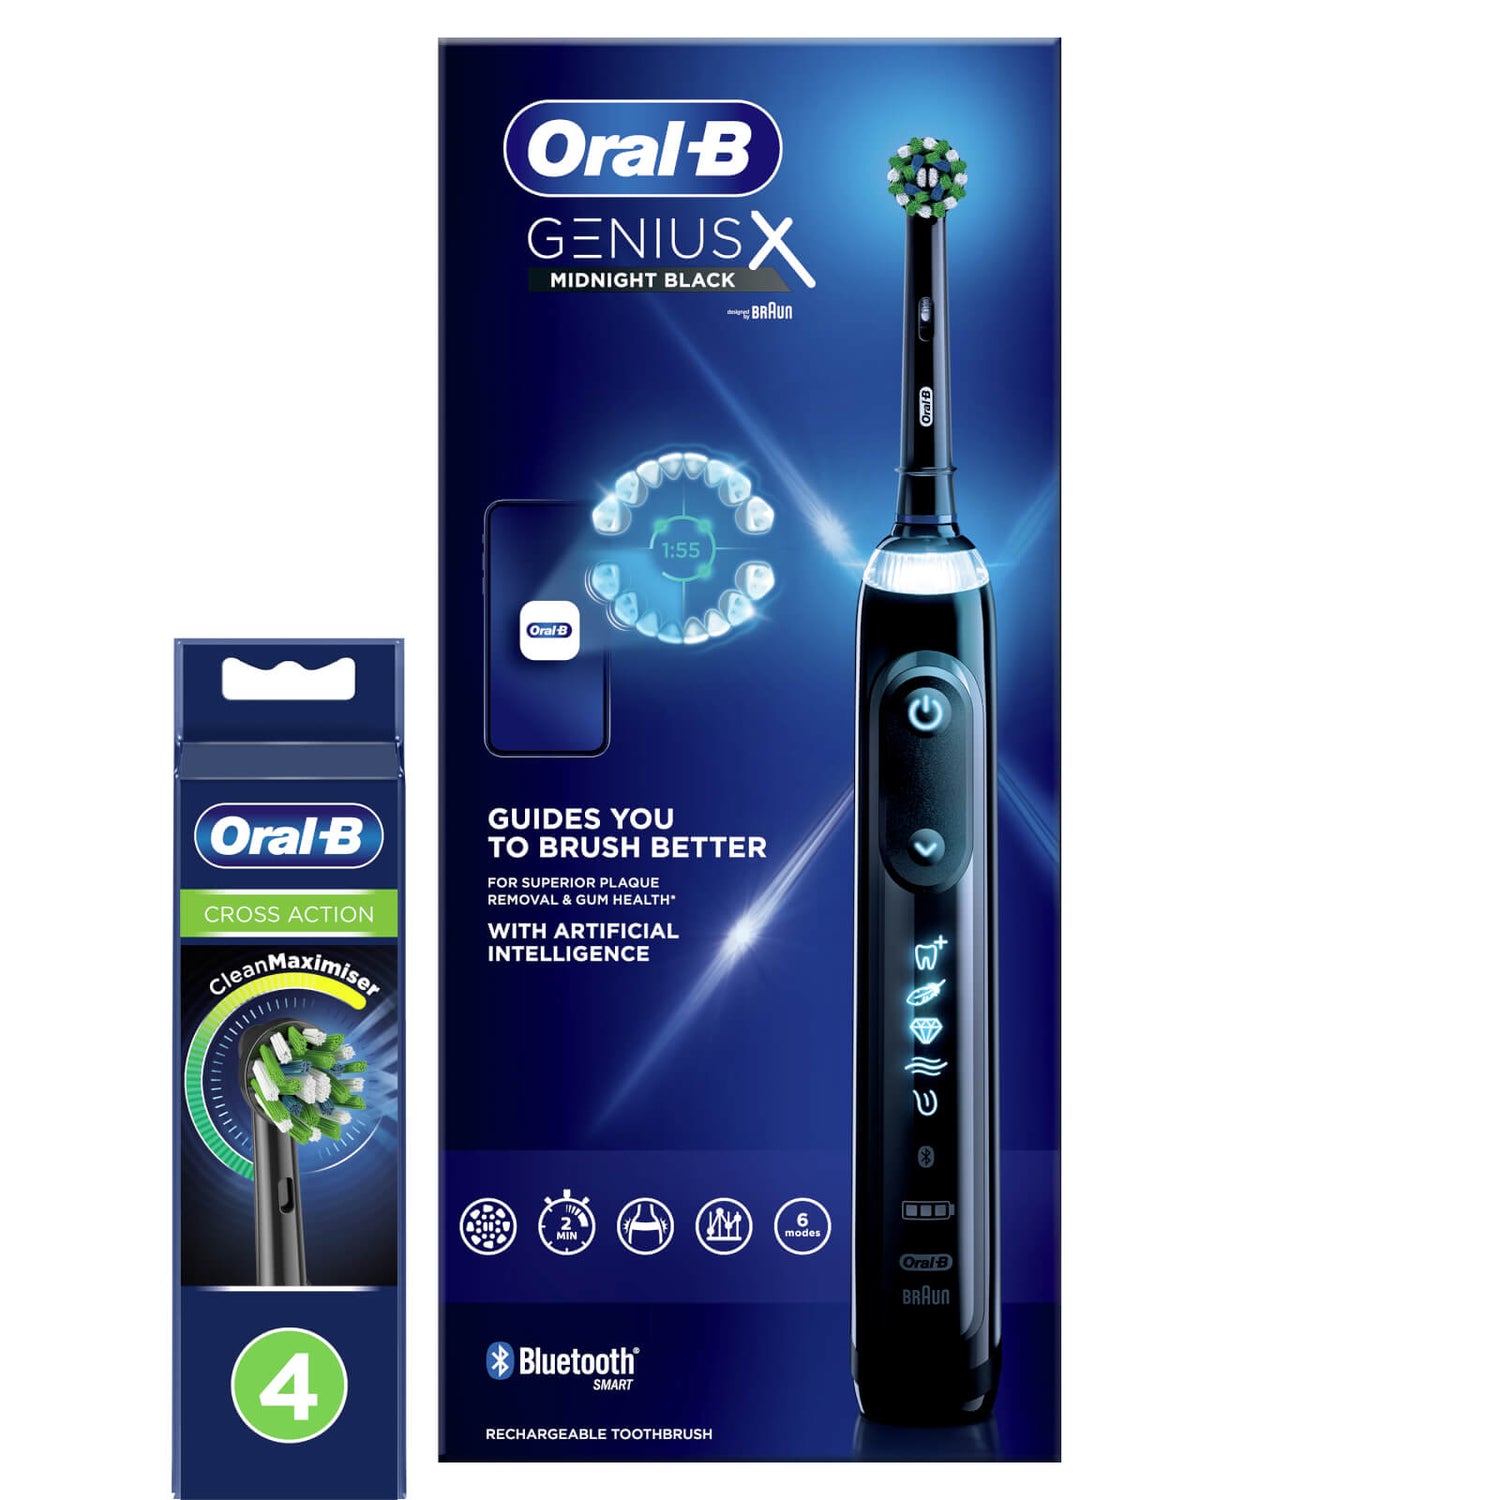 oral-b-coupons-rebates-february-2014-philips-sonicare-coupons